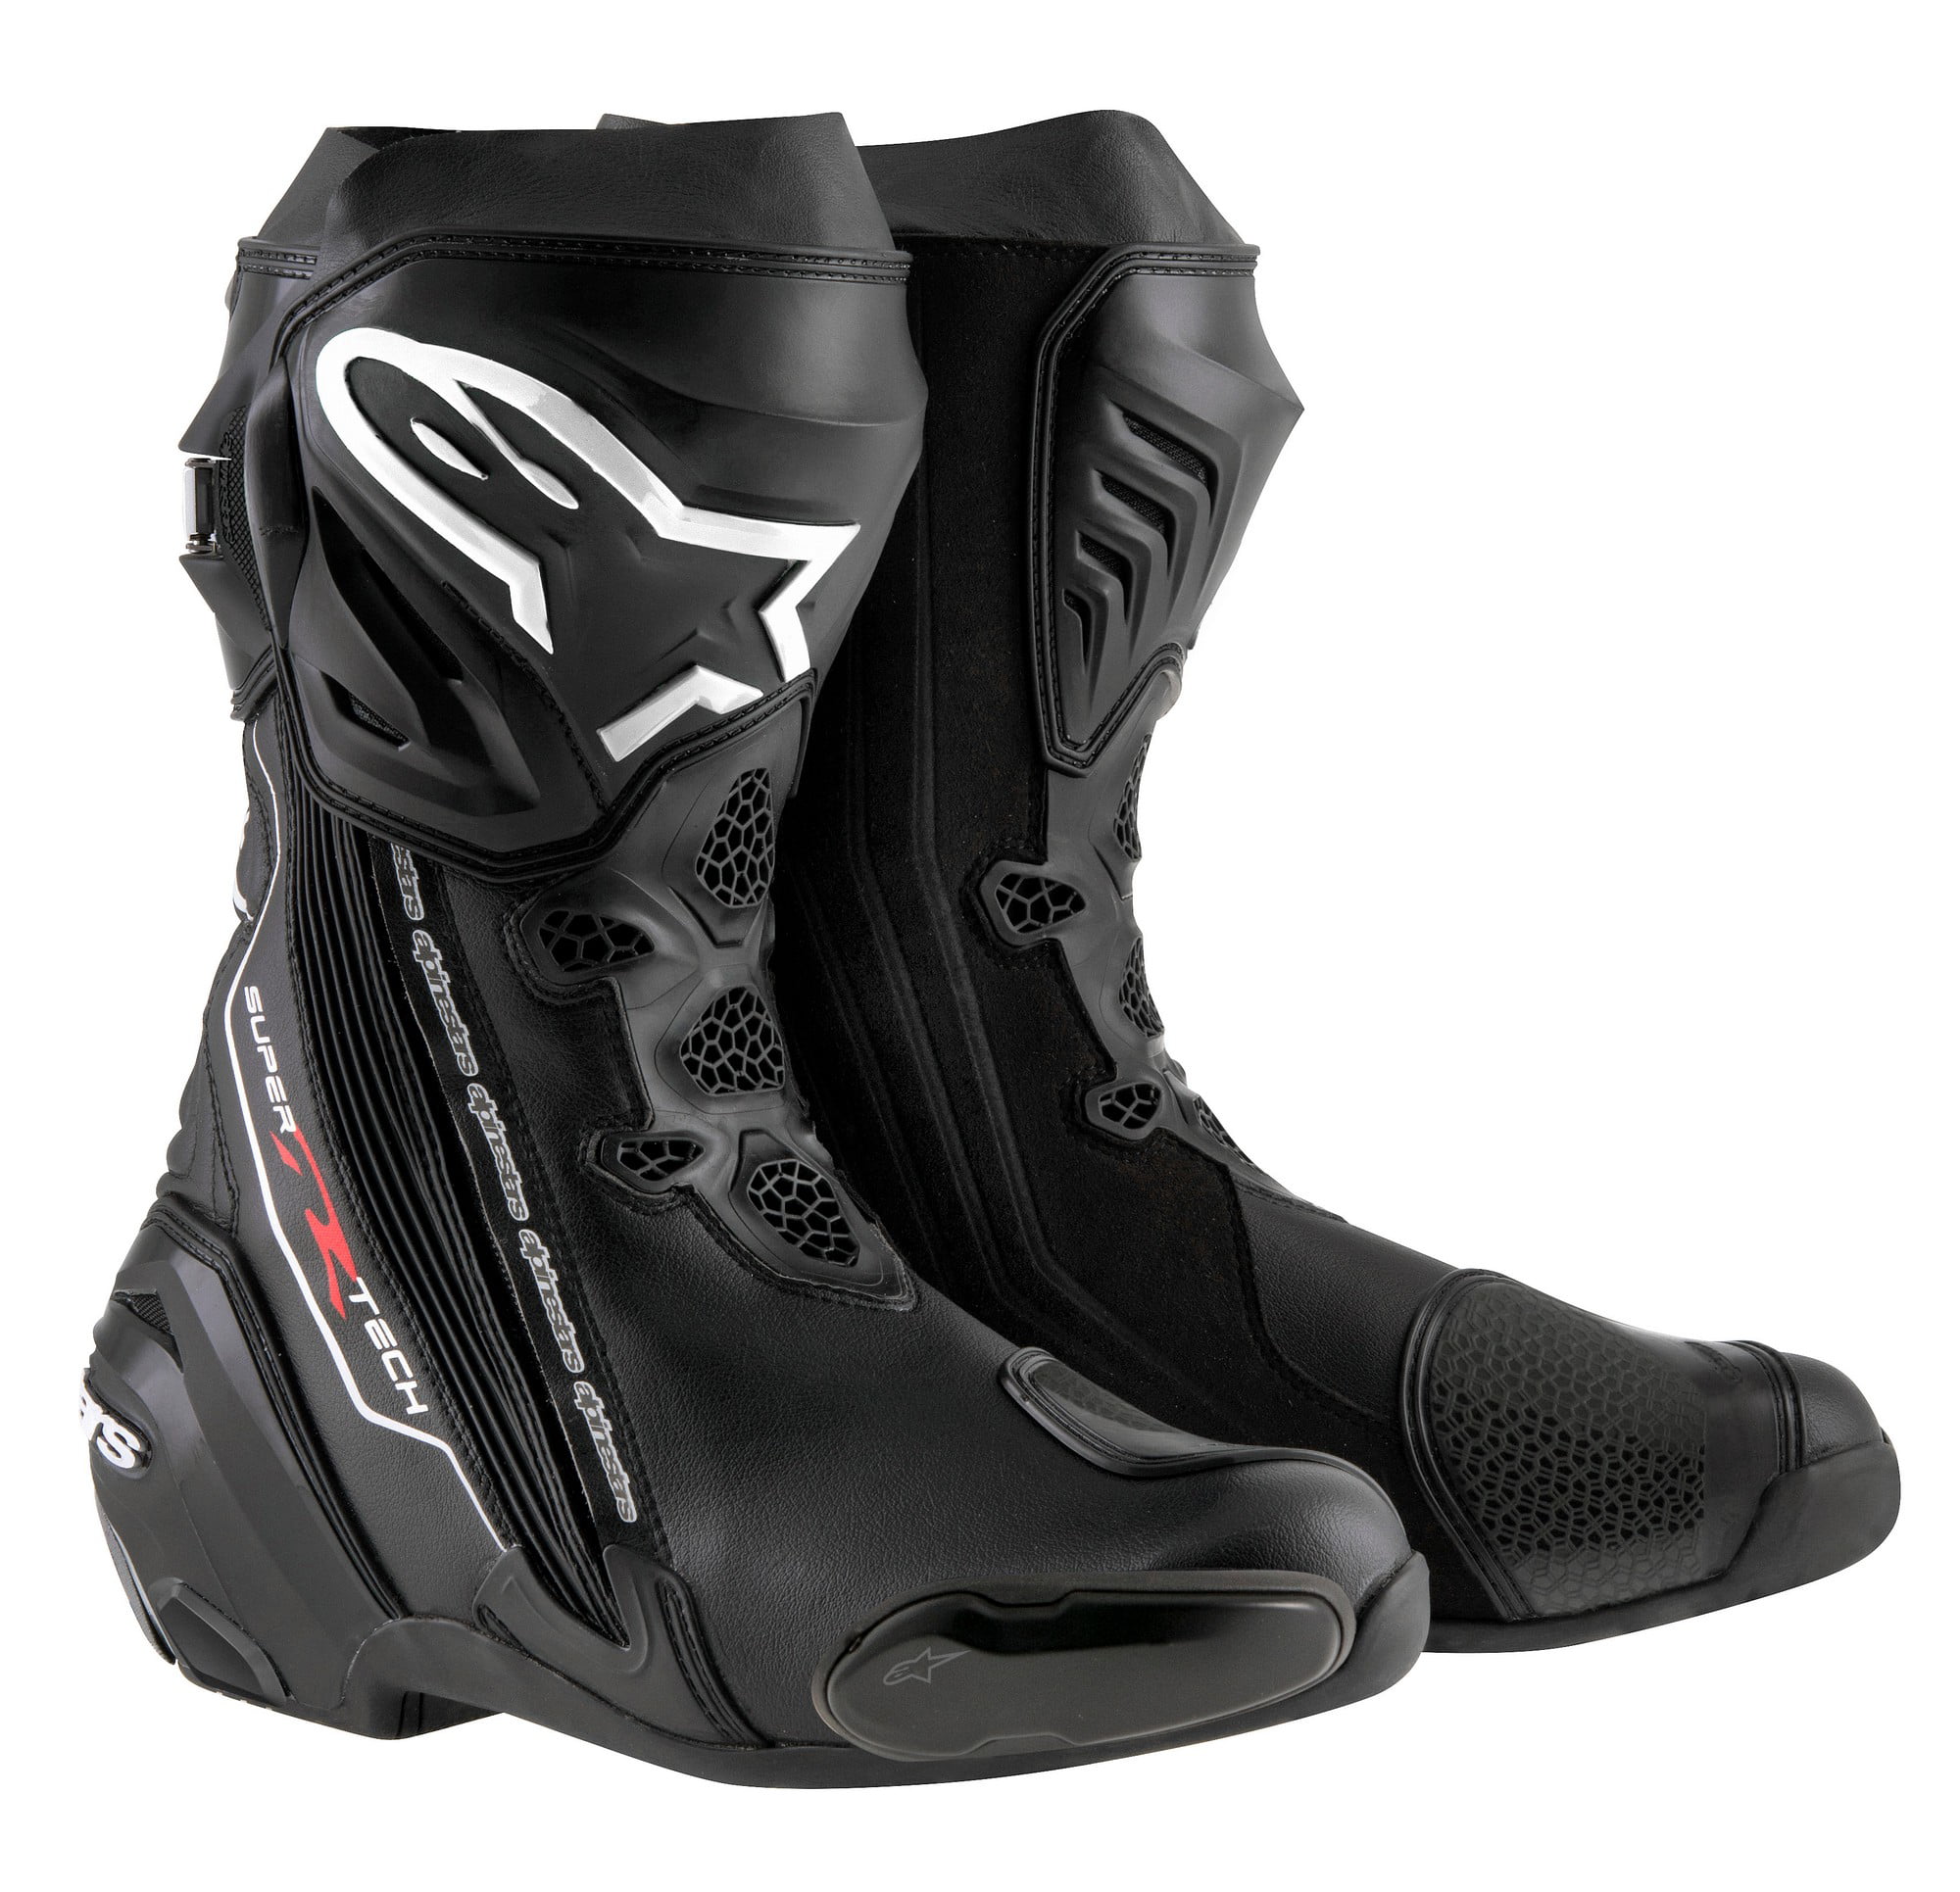 Outstars 641 Star Motorcycle Boots Black Size 41 